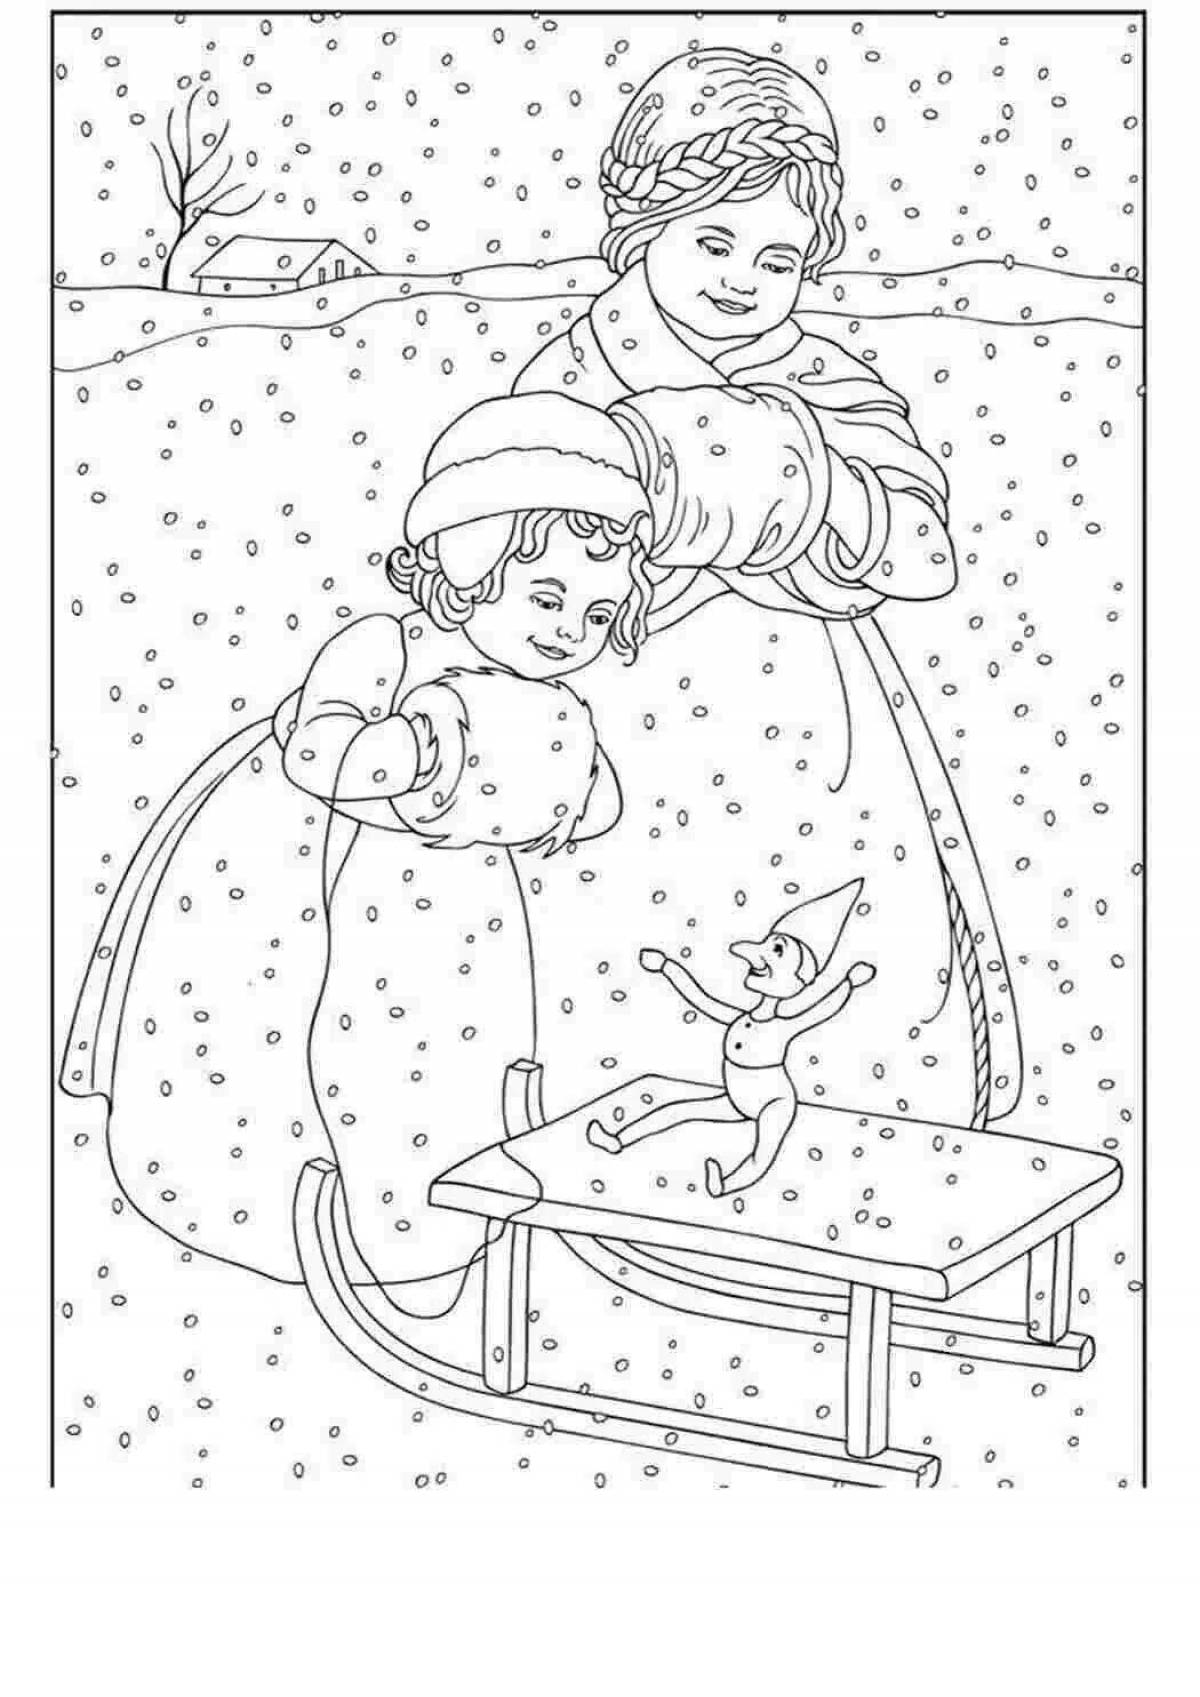 Exalted winter coloring pages for adults